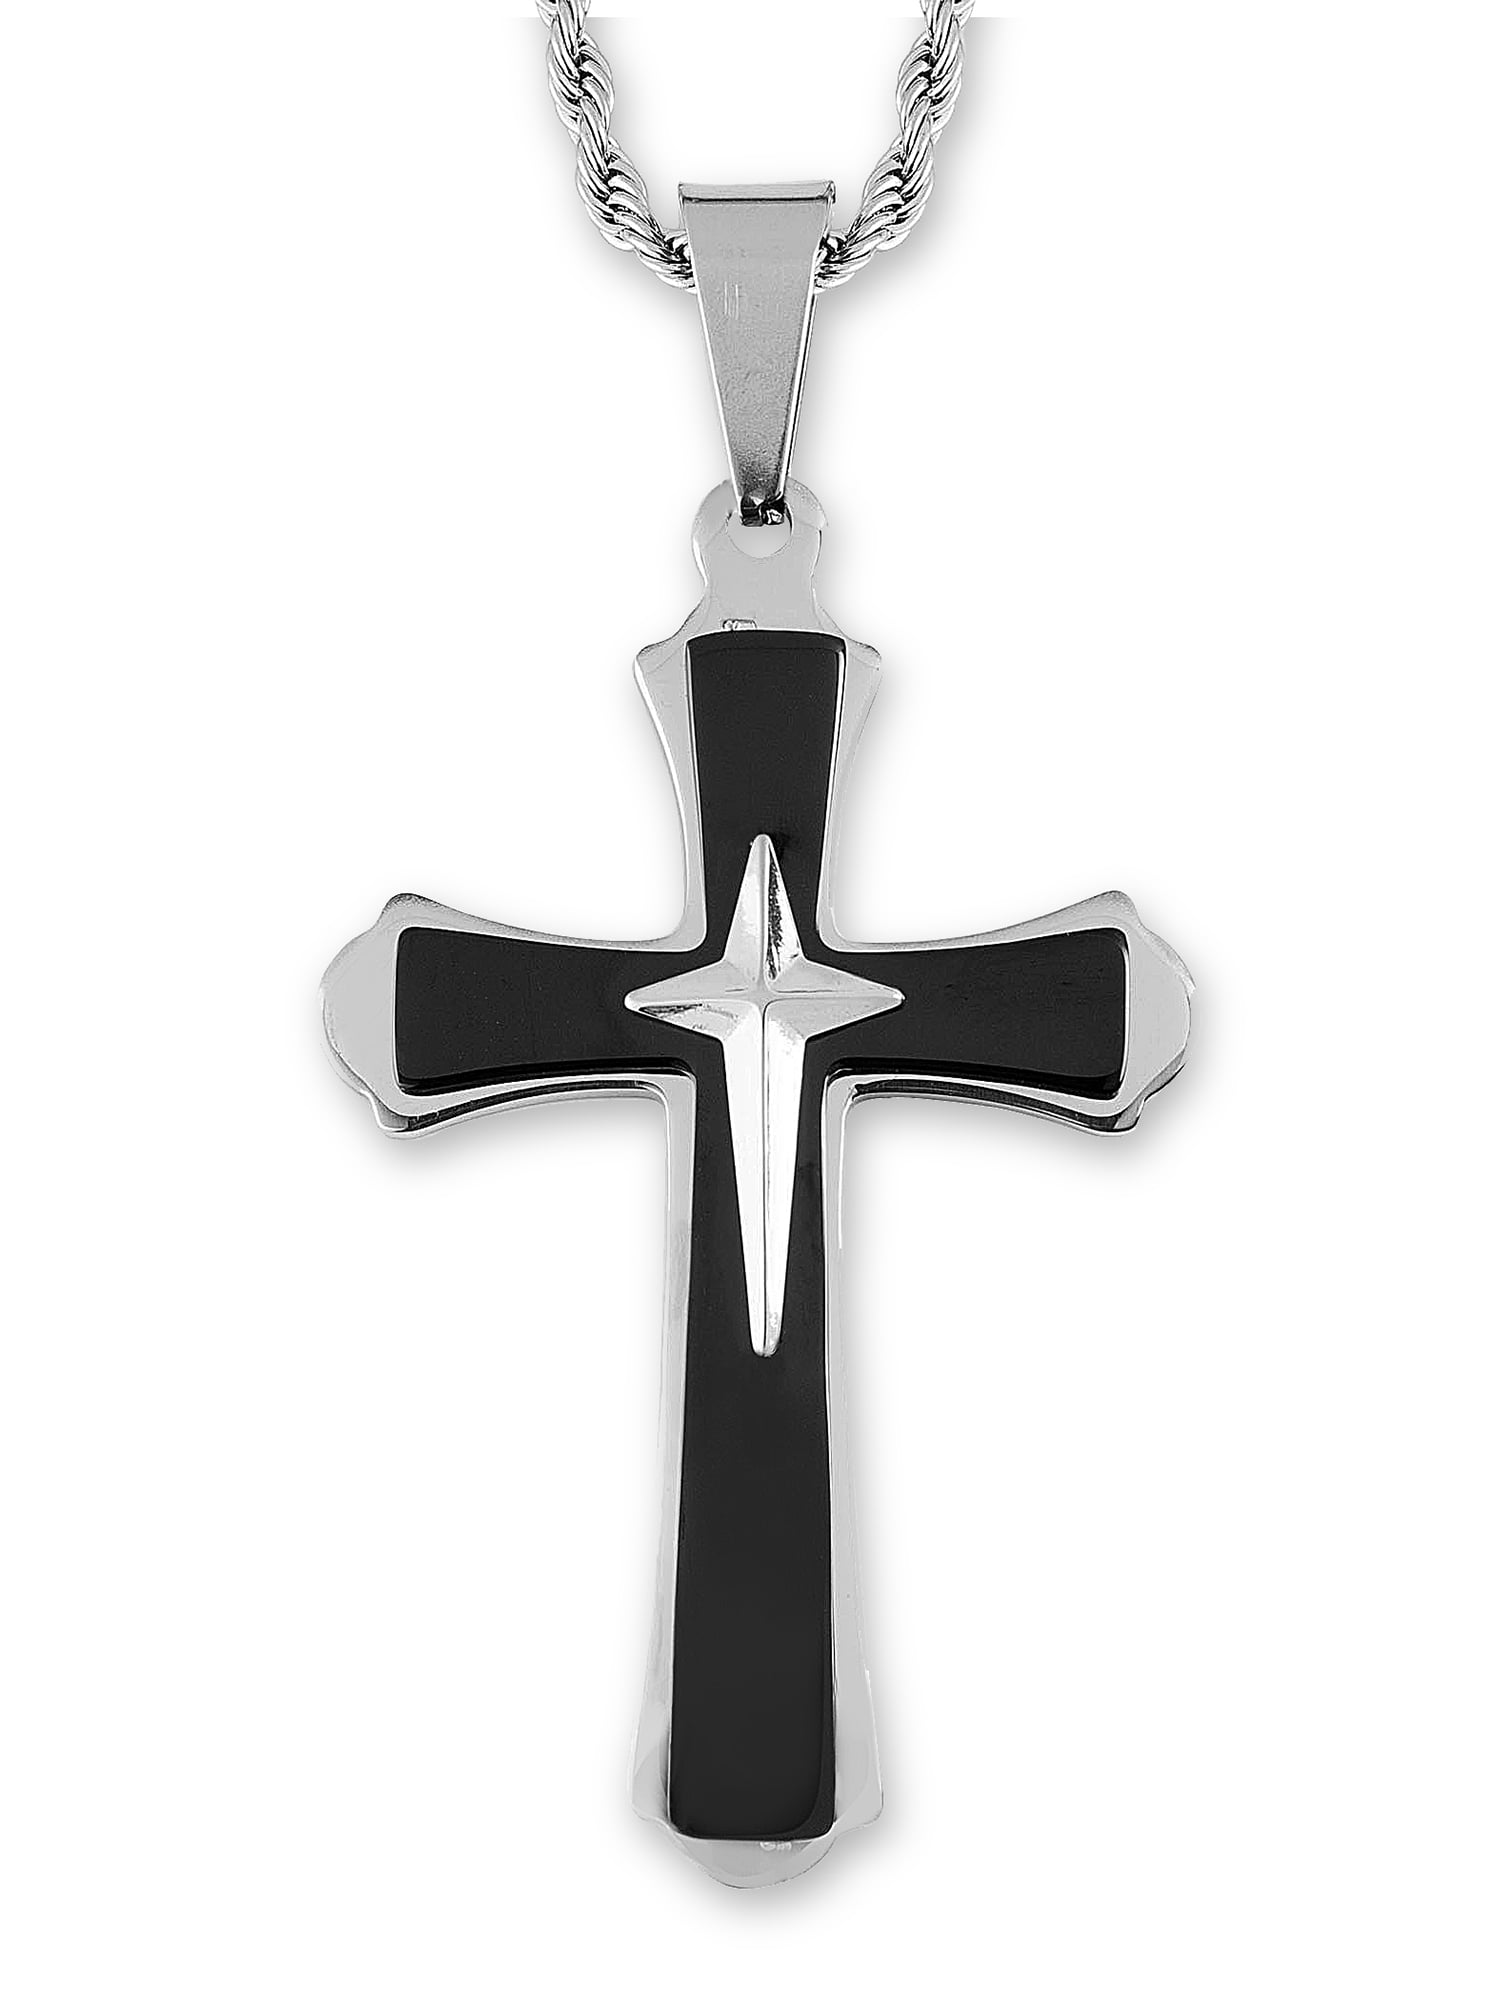 ANAZOZ Stainless Steel Pendant Necklace Cross 18-26Inch Link Silvery Unisexs Fashion Jewelry